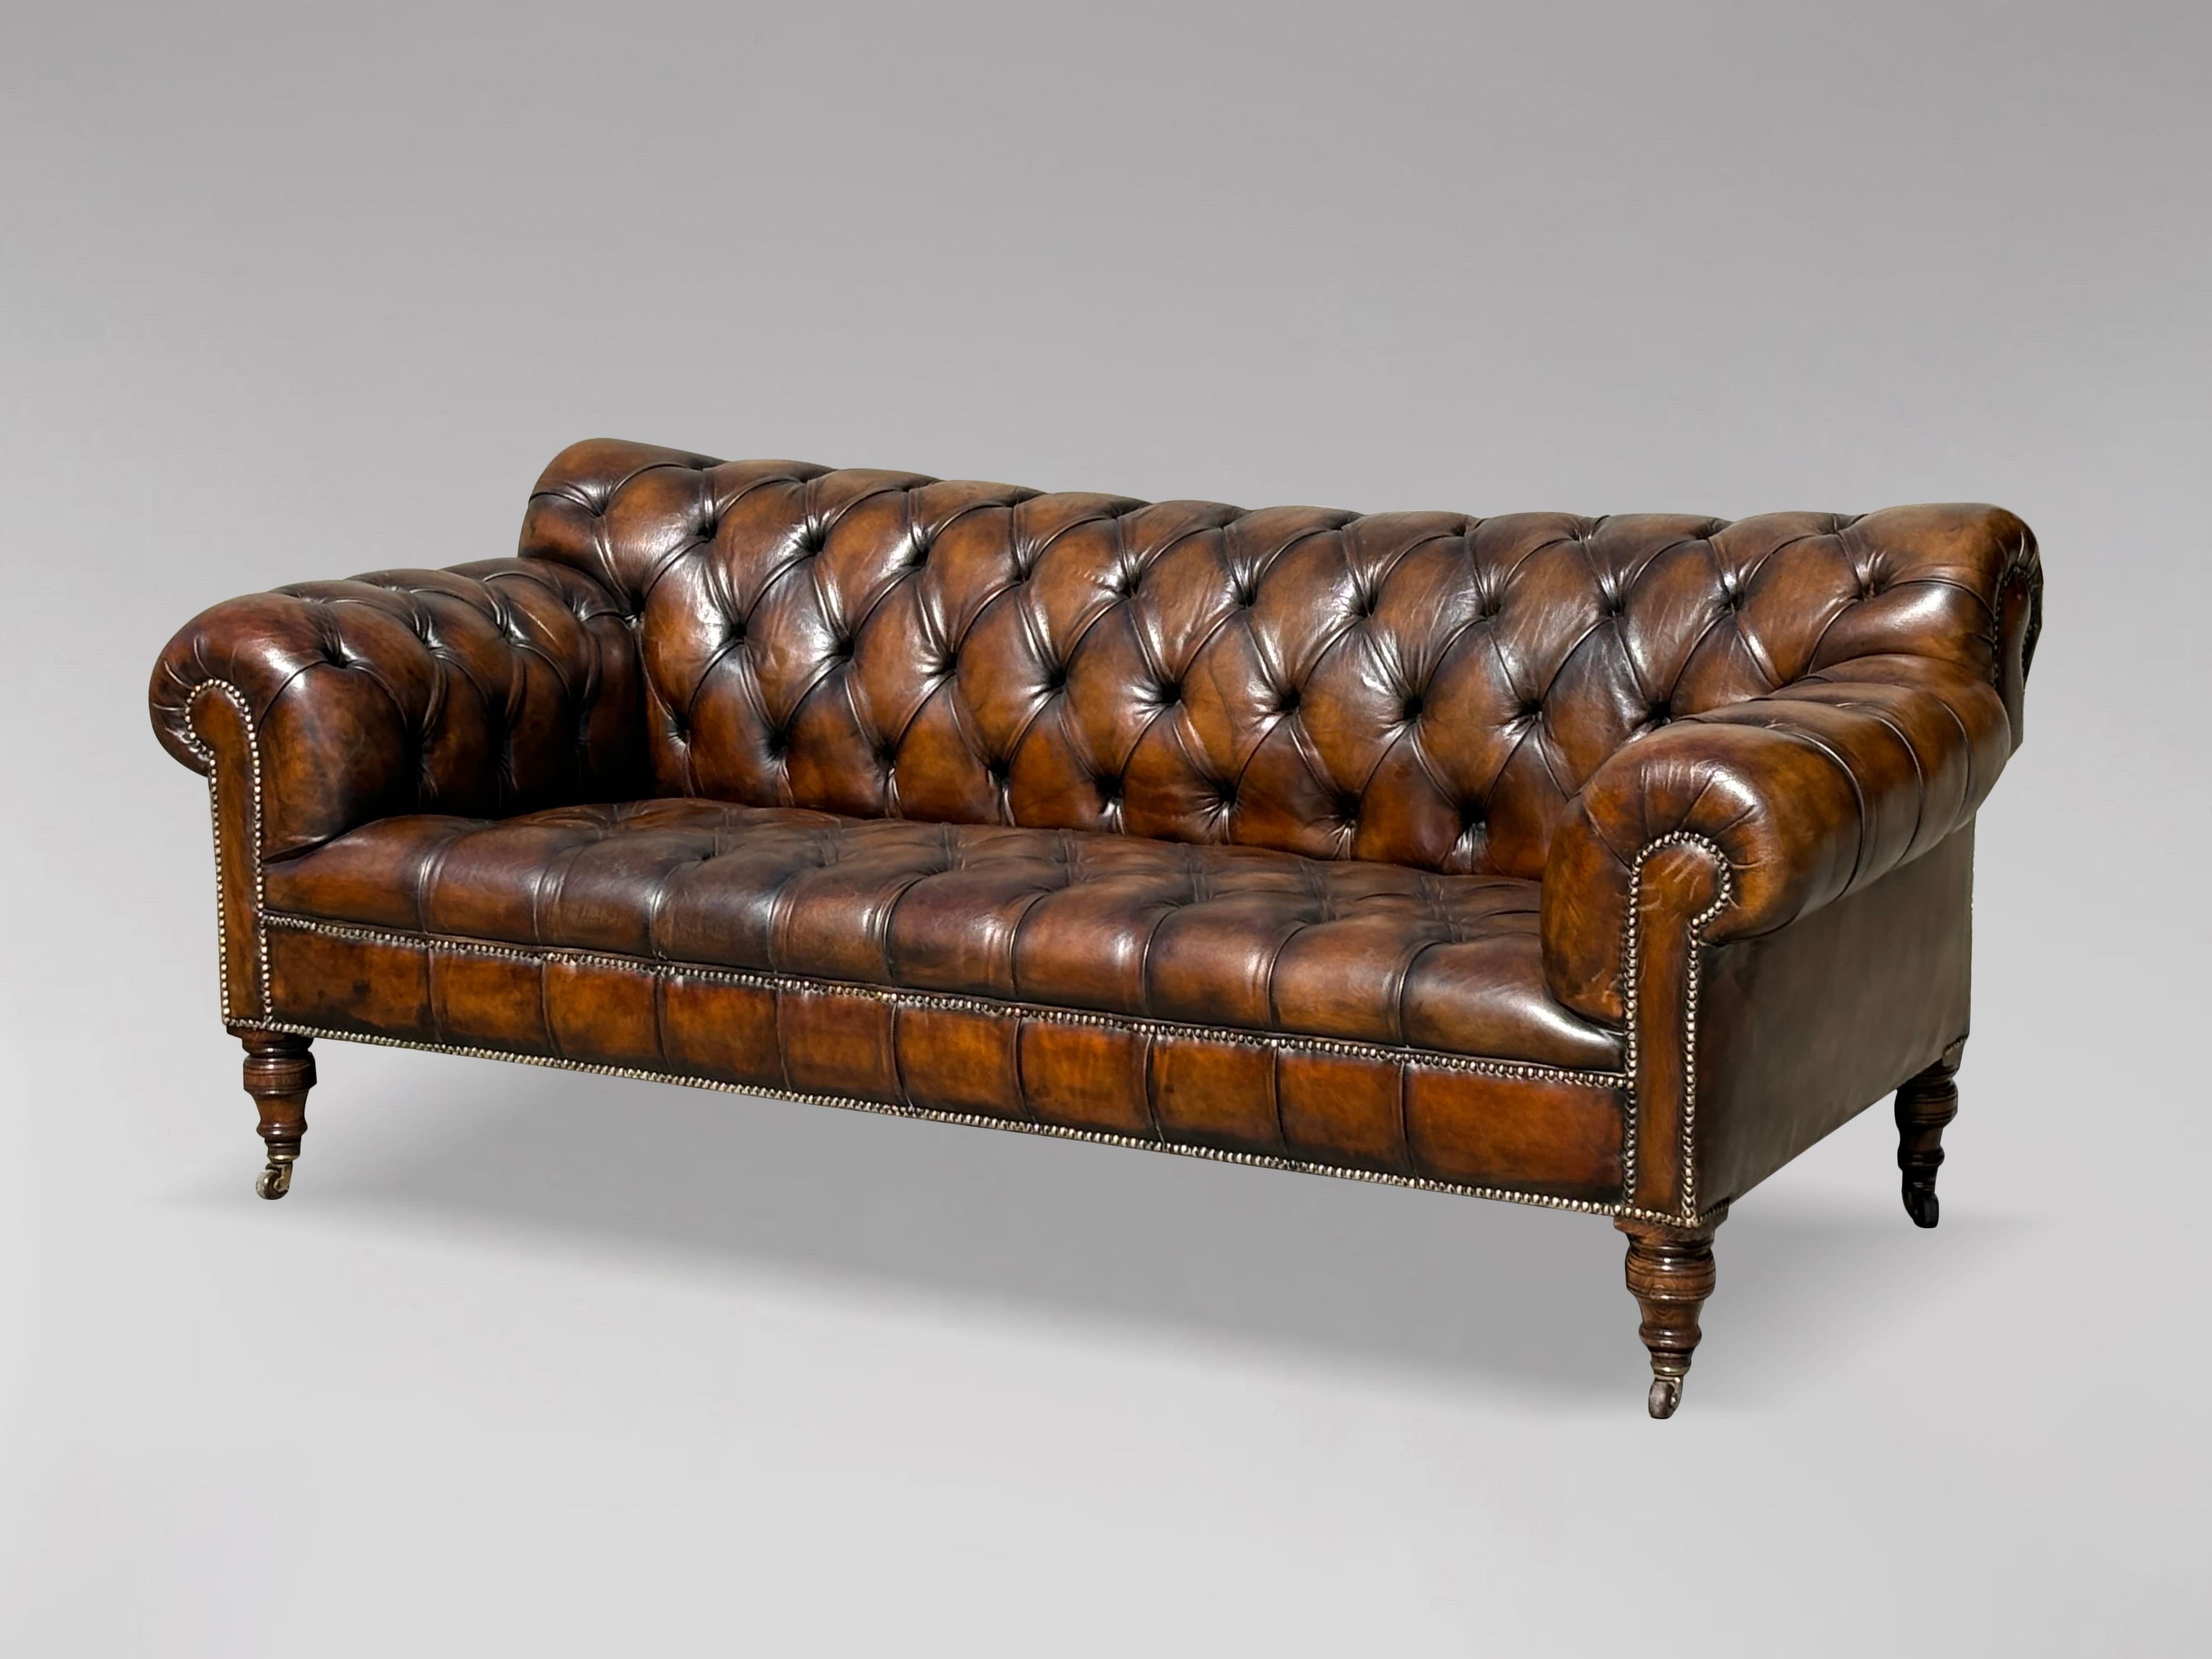 A stunning 19th century, Victorian period, large three seater leather button down brown colour chesterfield sofa. With the original brown leather hide that has been cleaned and polished giving a lovely soft and sumptuous feel to the quality leather.